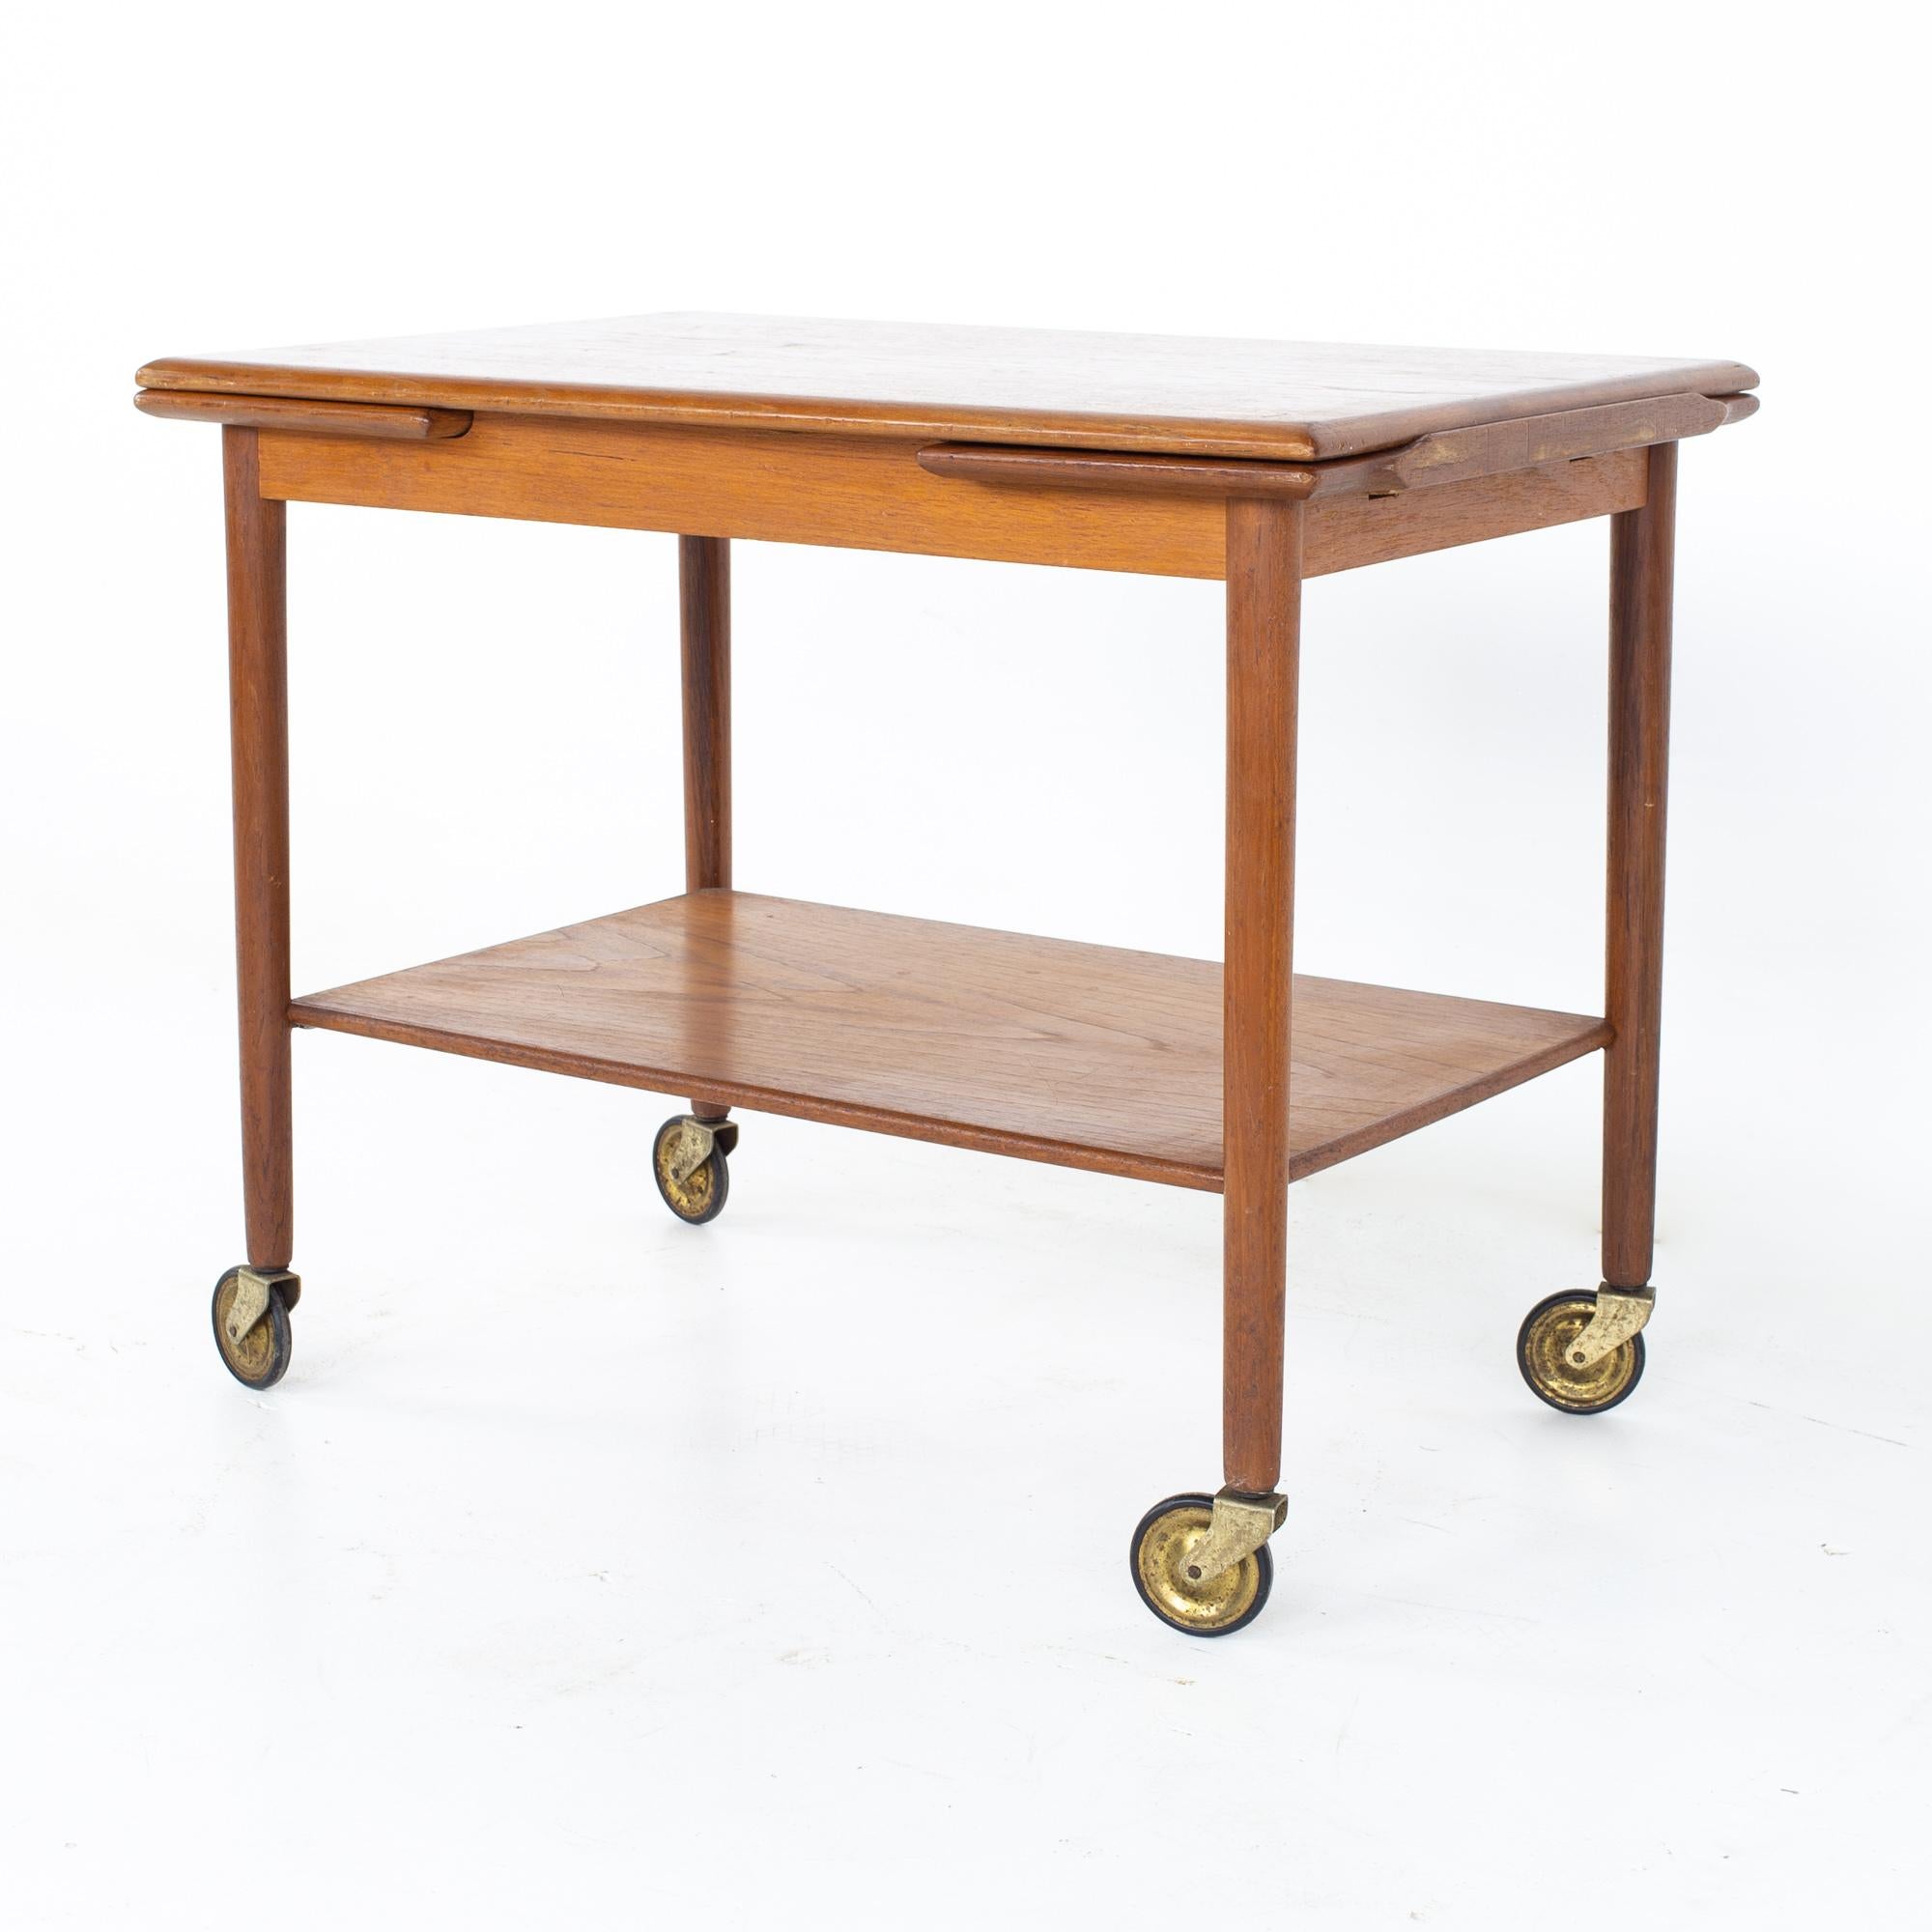 Mid Century Danish teak expanding bar cart
Bar cart measures: 30 wide x 19.25 deep x 23.5 inches high; when extended bar cart is 47.5 inches wide

All pieces of furniture can be had in what we call restored vintage condition. That means the piece